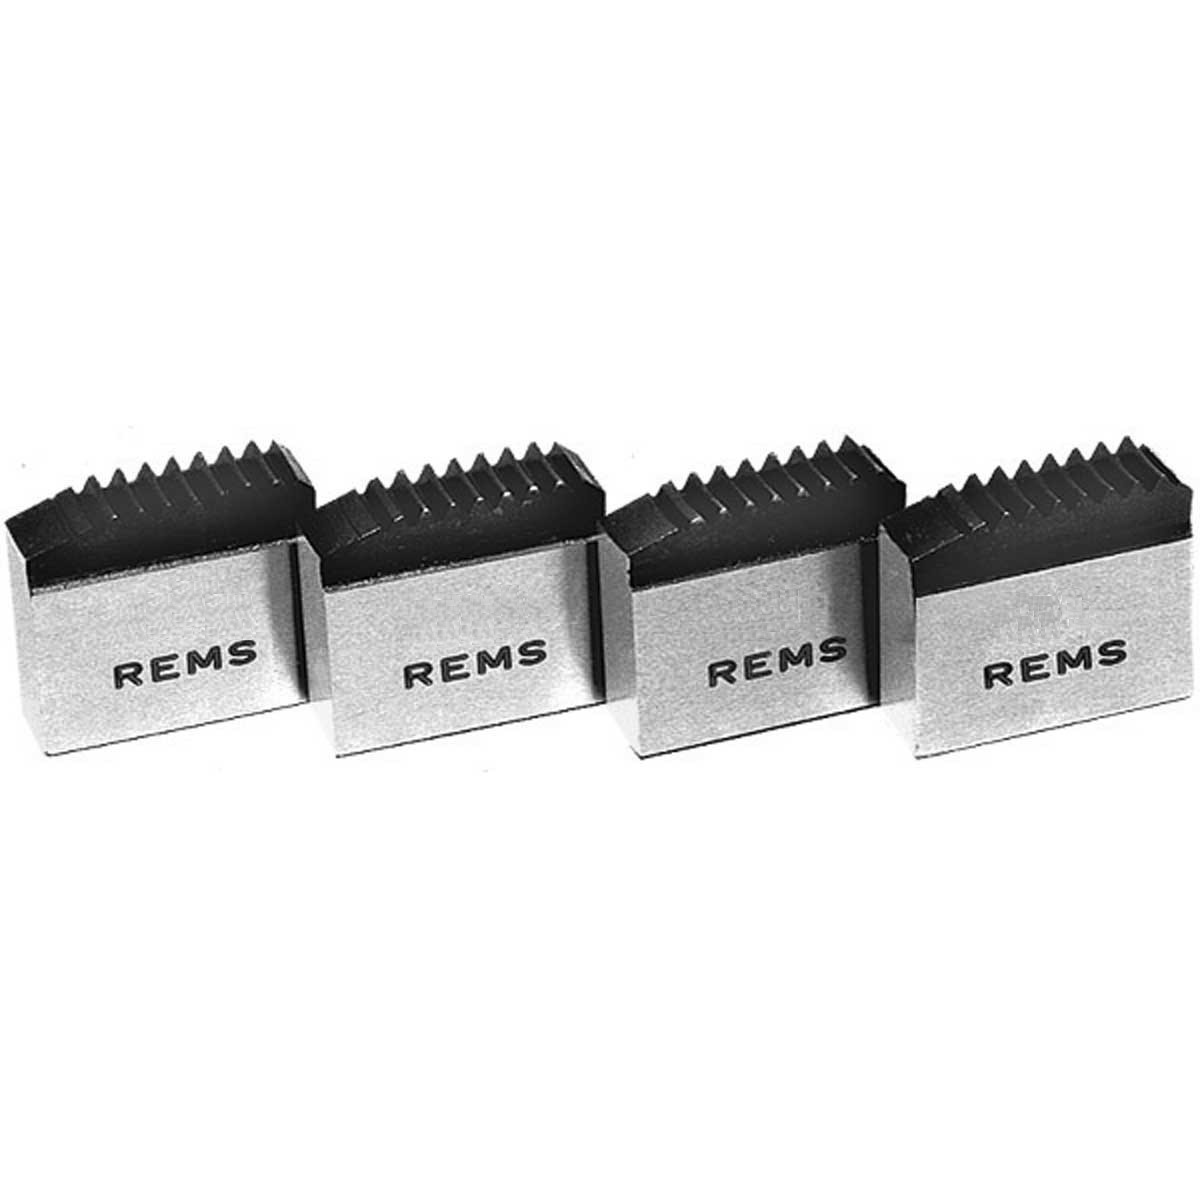 REMS - 2" Replacement Die Set, 521282